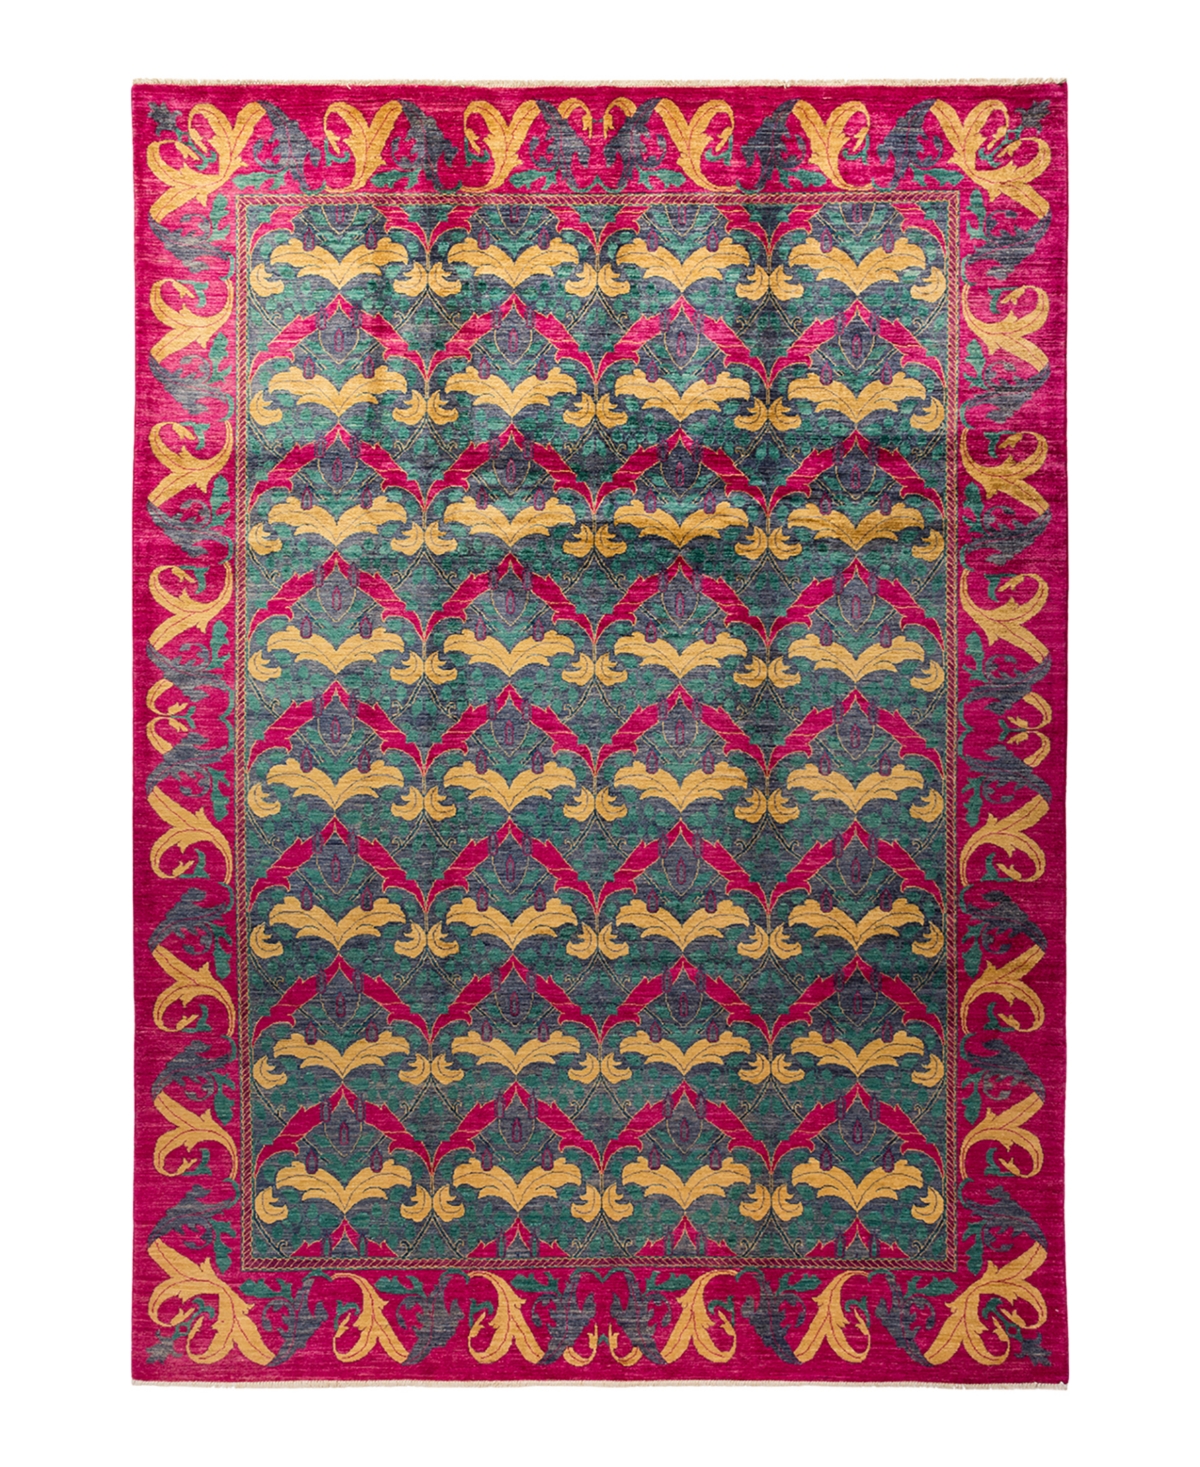 Adorn Hand Woven Rugs Arts and Crafts M1624 9'1in x 12' Area Rug - Purple